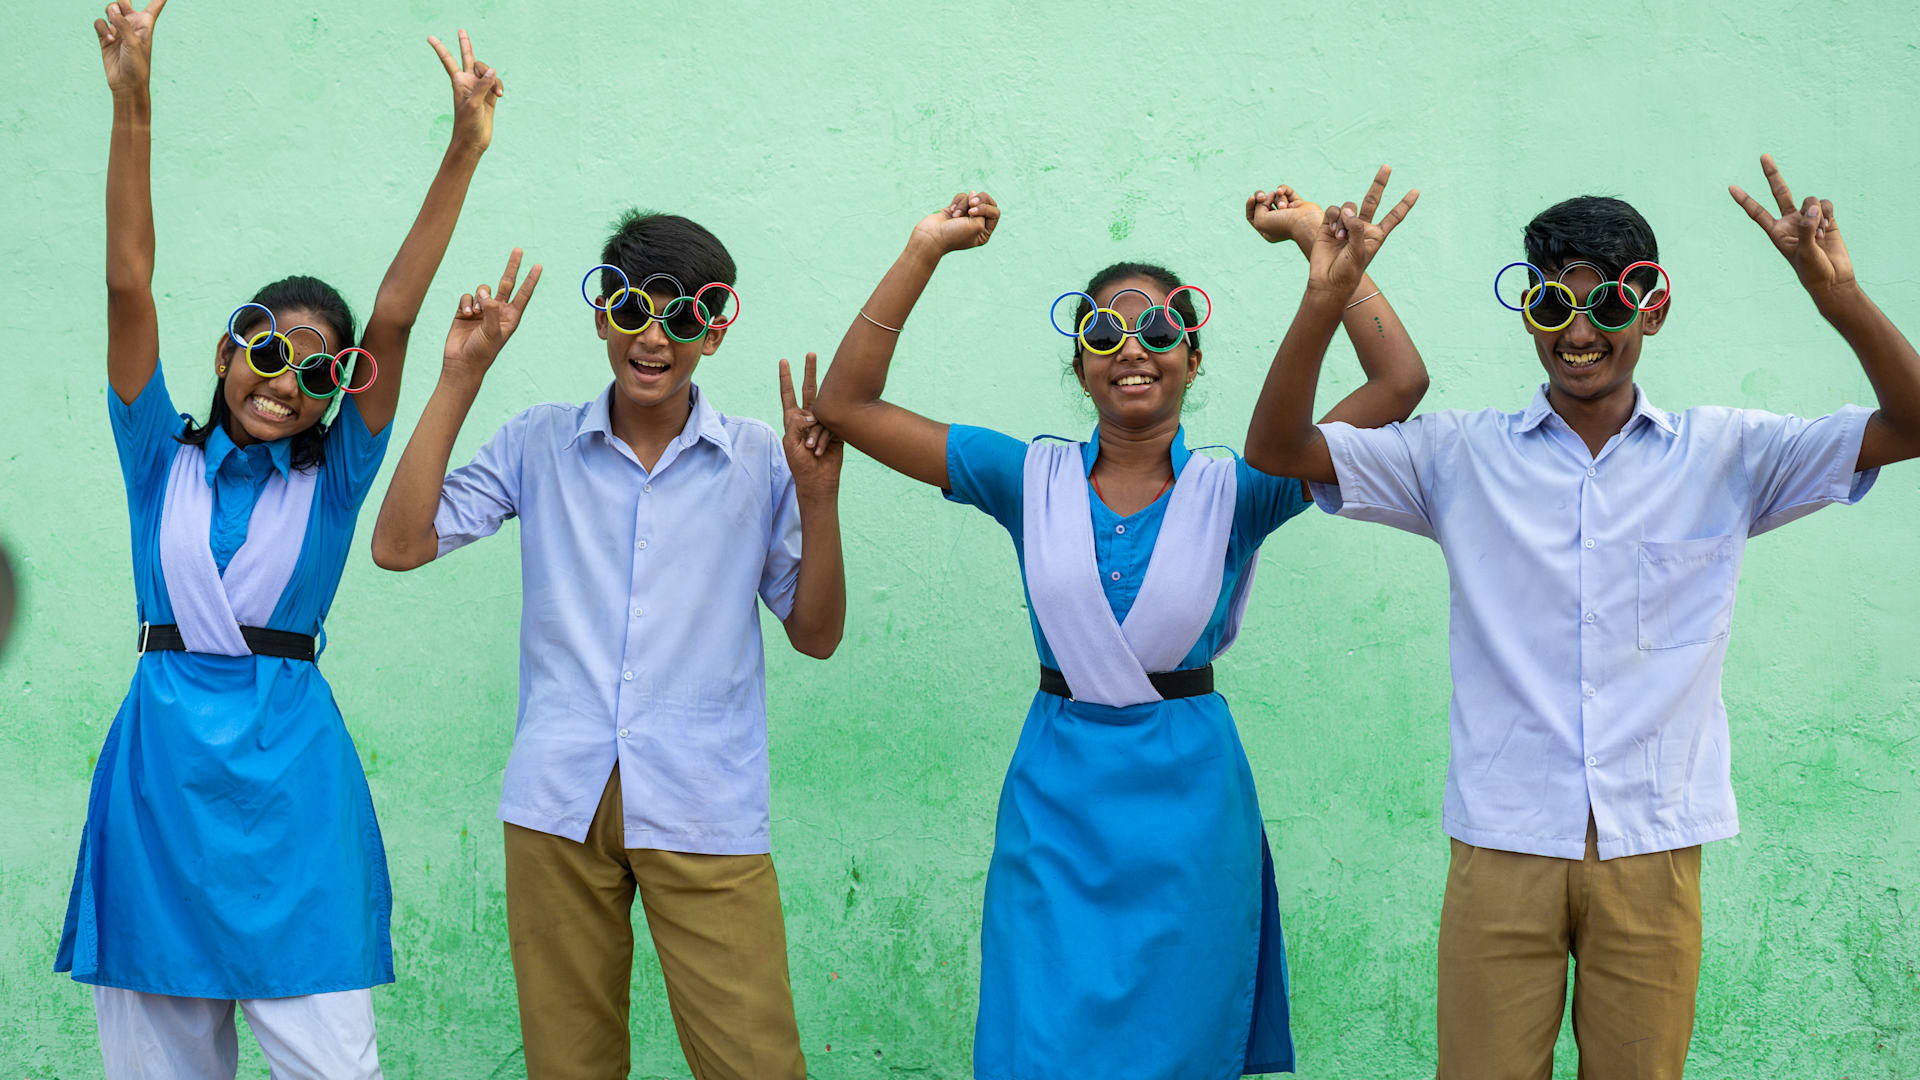 Indian children smiling and wearing olympic sunglasses